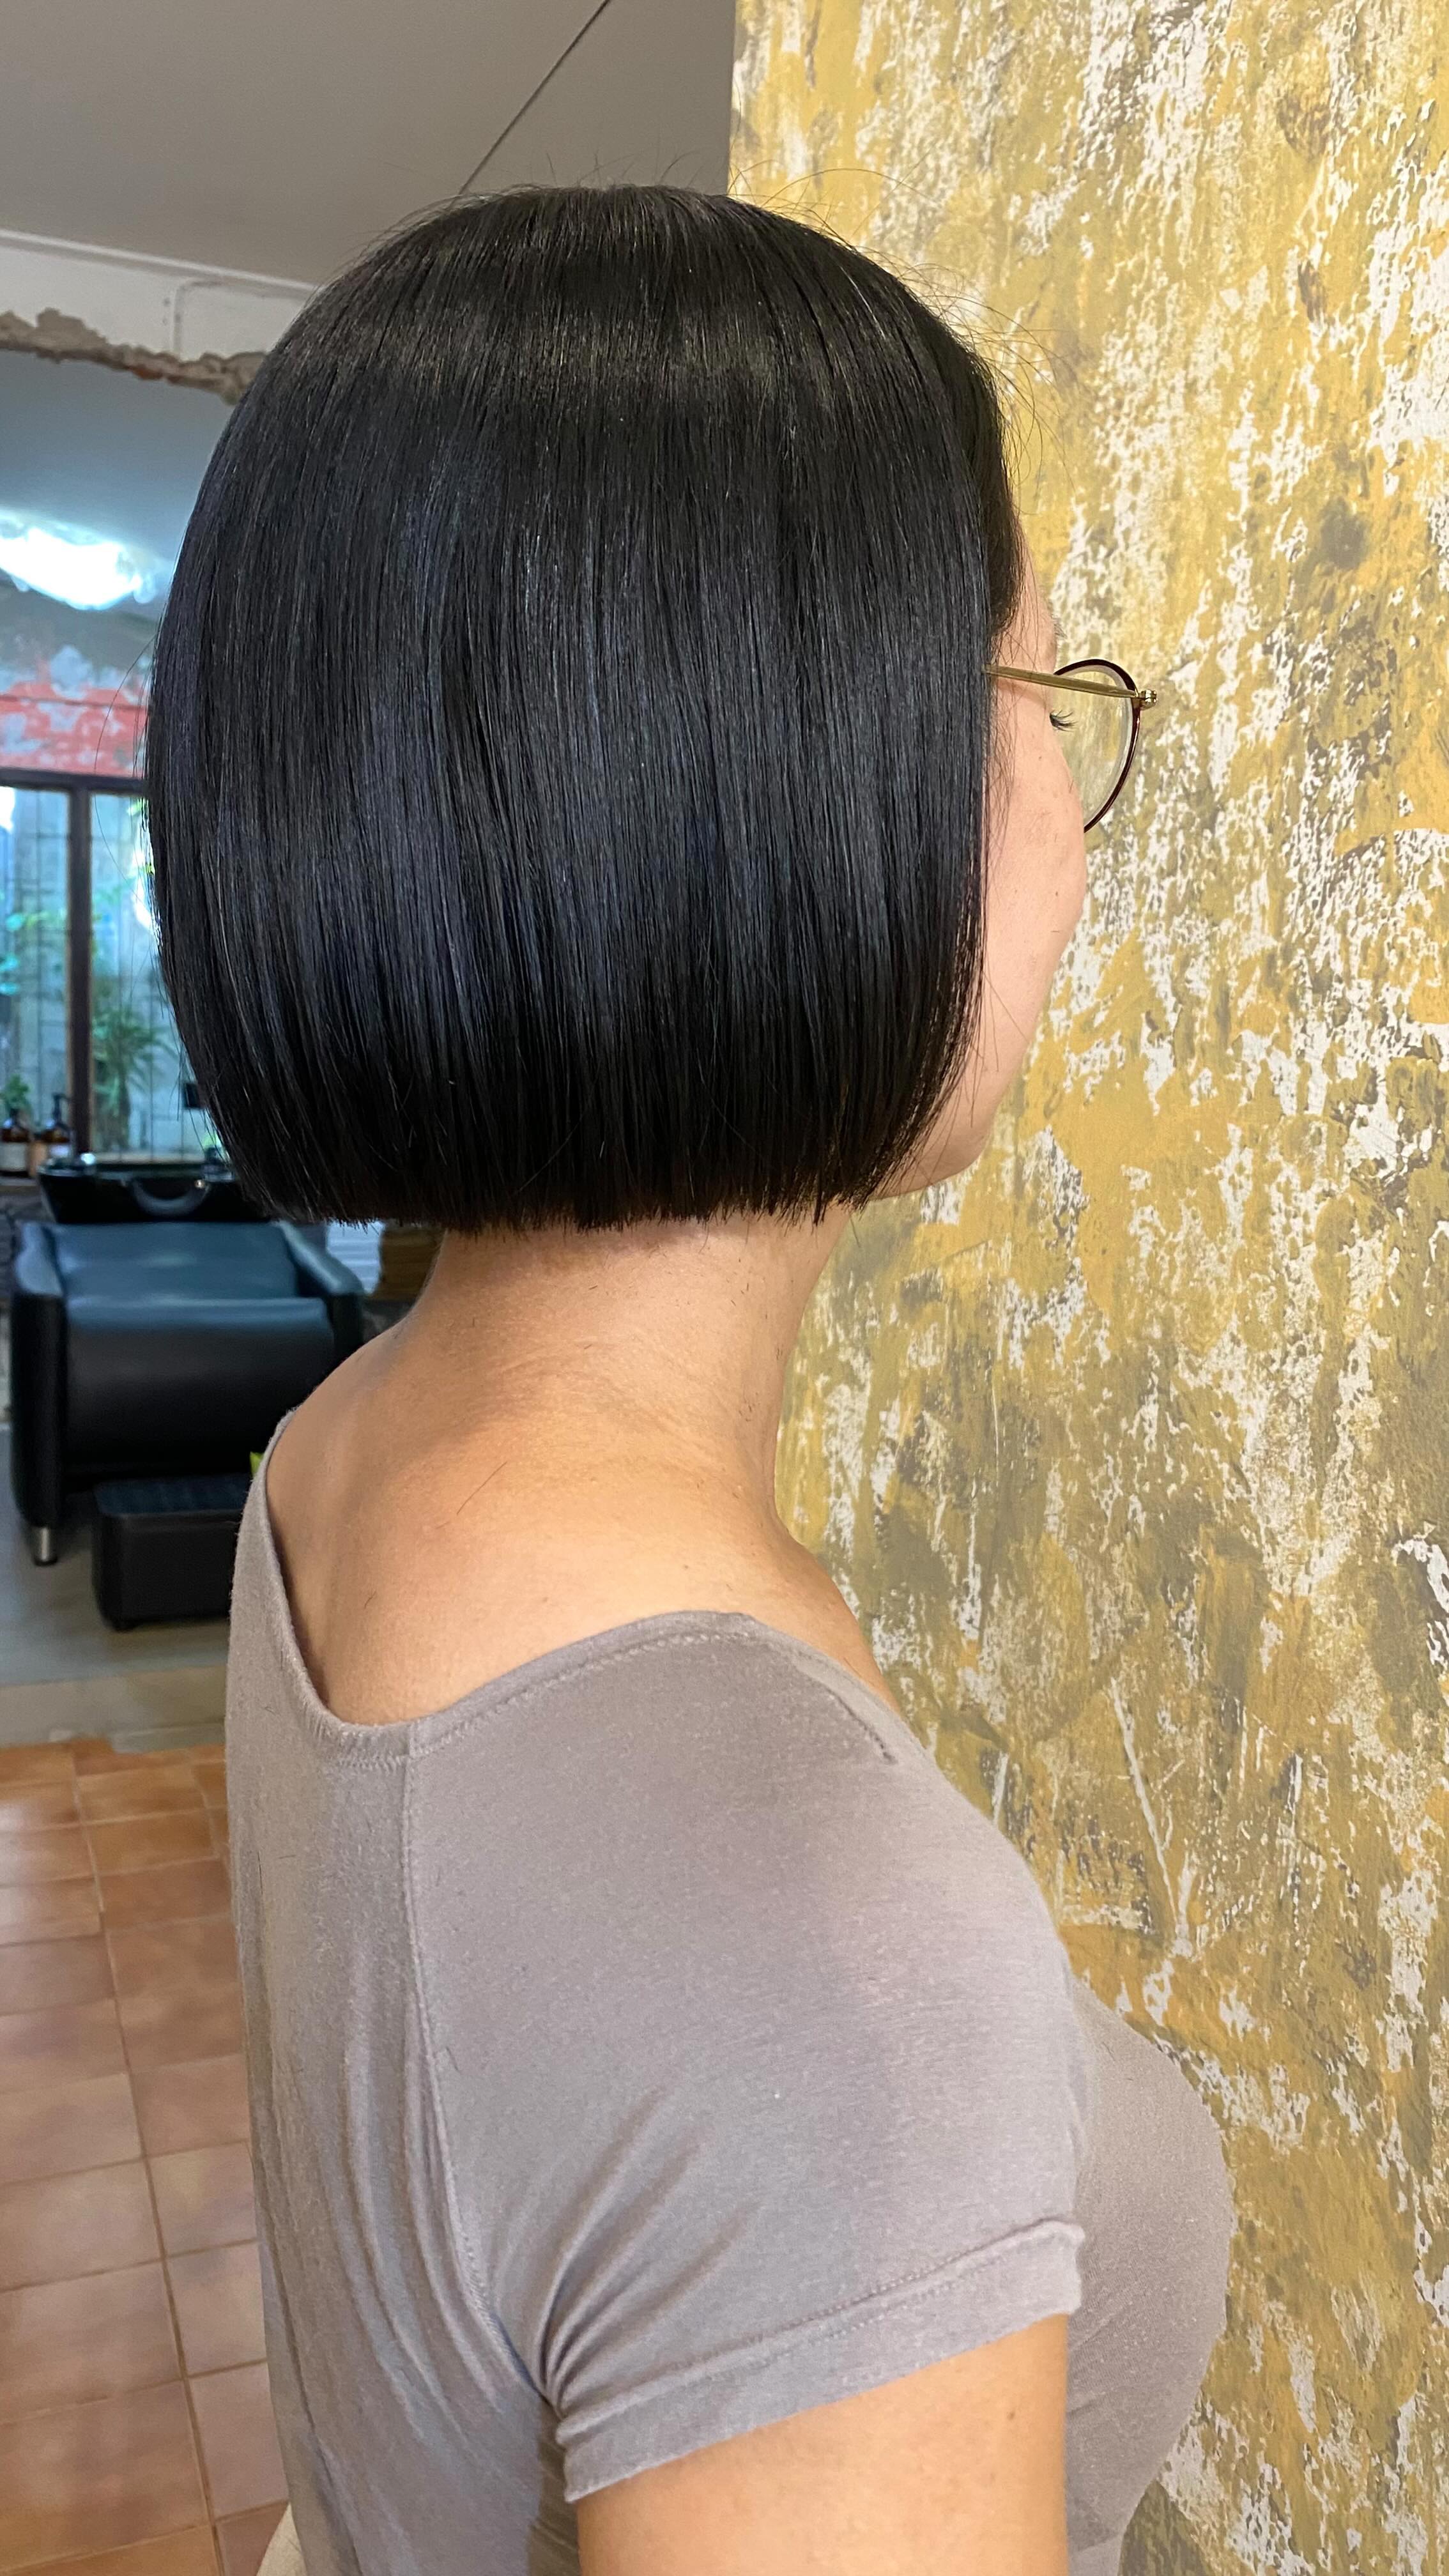 Thank you for coming 🩷
.
.
Bob style ︎
.
.  Promotion of April  Organic Head spa
　　　　　　　　　　　　　800B → 600B  Organic treatment 
(It is to repairs and strengthens hair from within, resulting in healthier, softer, and shinier hair)  　　　　　　　　　　　　2500B → 2000B  Japanese treatment 
(It is to keep smooth and moisturizer hair)  　　　　　　　　　　　　1200B →1000B  #cuchuhairdesign #headspa #headmassage #treatment #organic #natulique #natulique #natuliquethailand 
#sukhimvit26 #ร้านทำผมแถวสุขุมวิท #ร้านทำผมสไตญี่ปุ่น #ร้านทำผมพร้อมพงษ์ #ทำสีผมสวยๆ